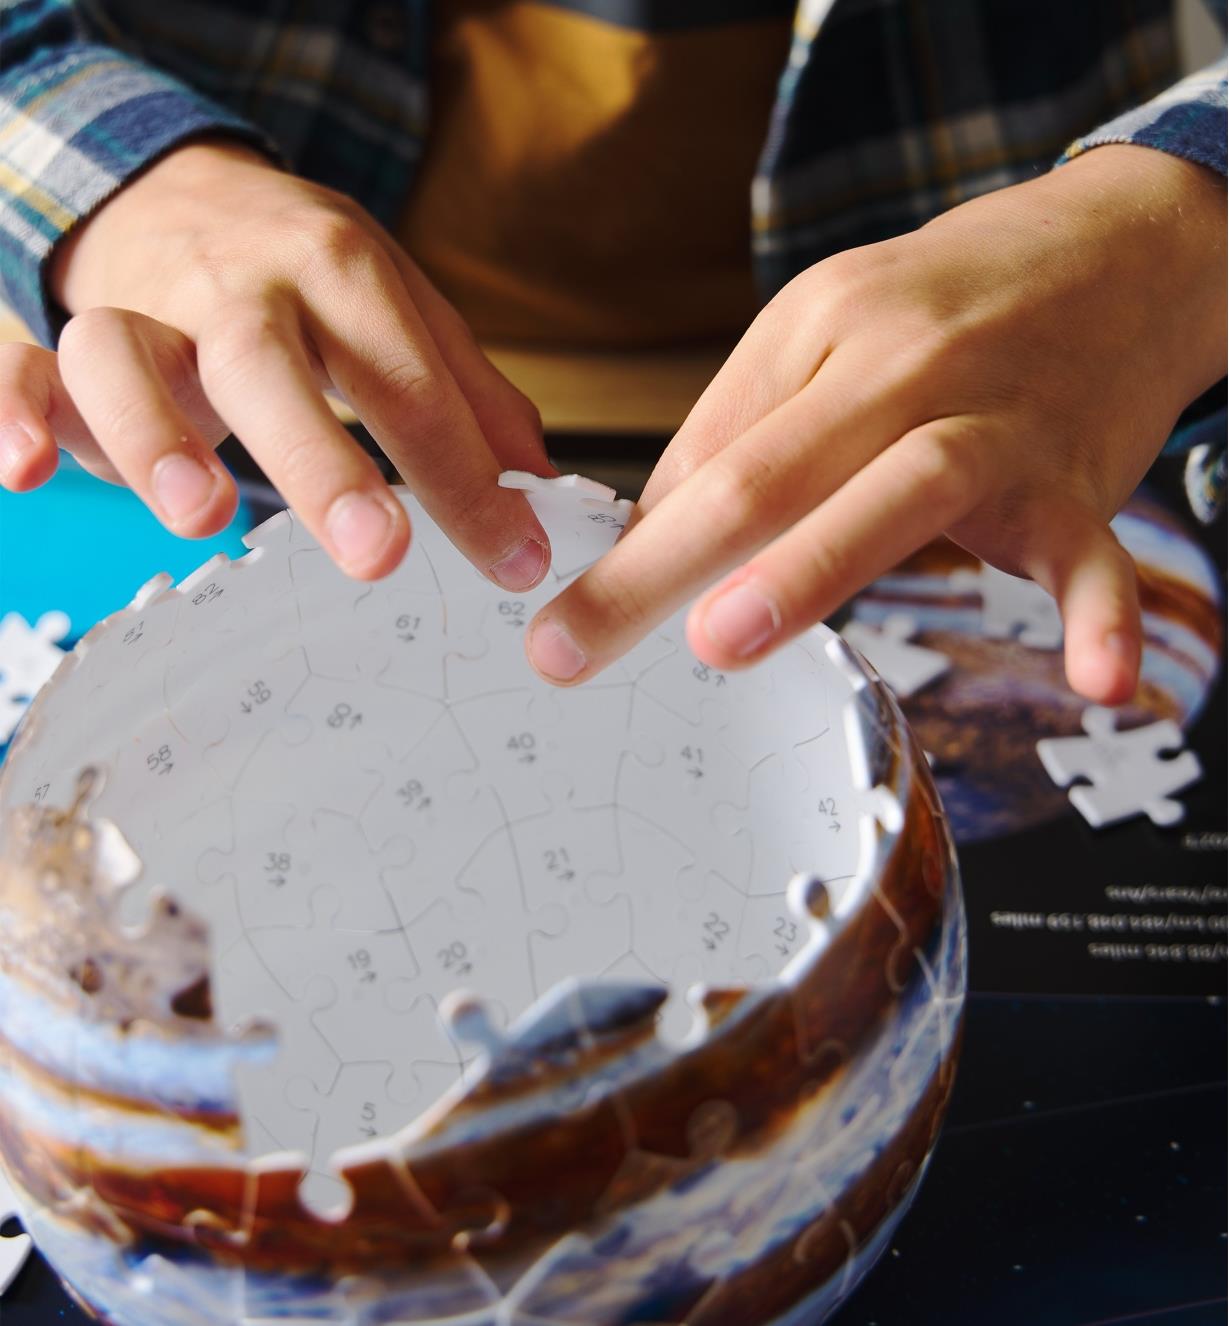 A 3D planet puzzle being assembled with numbers on the inside of the pieces